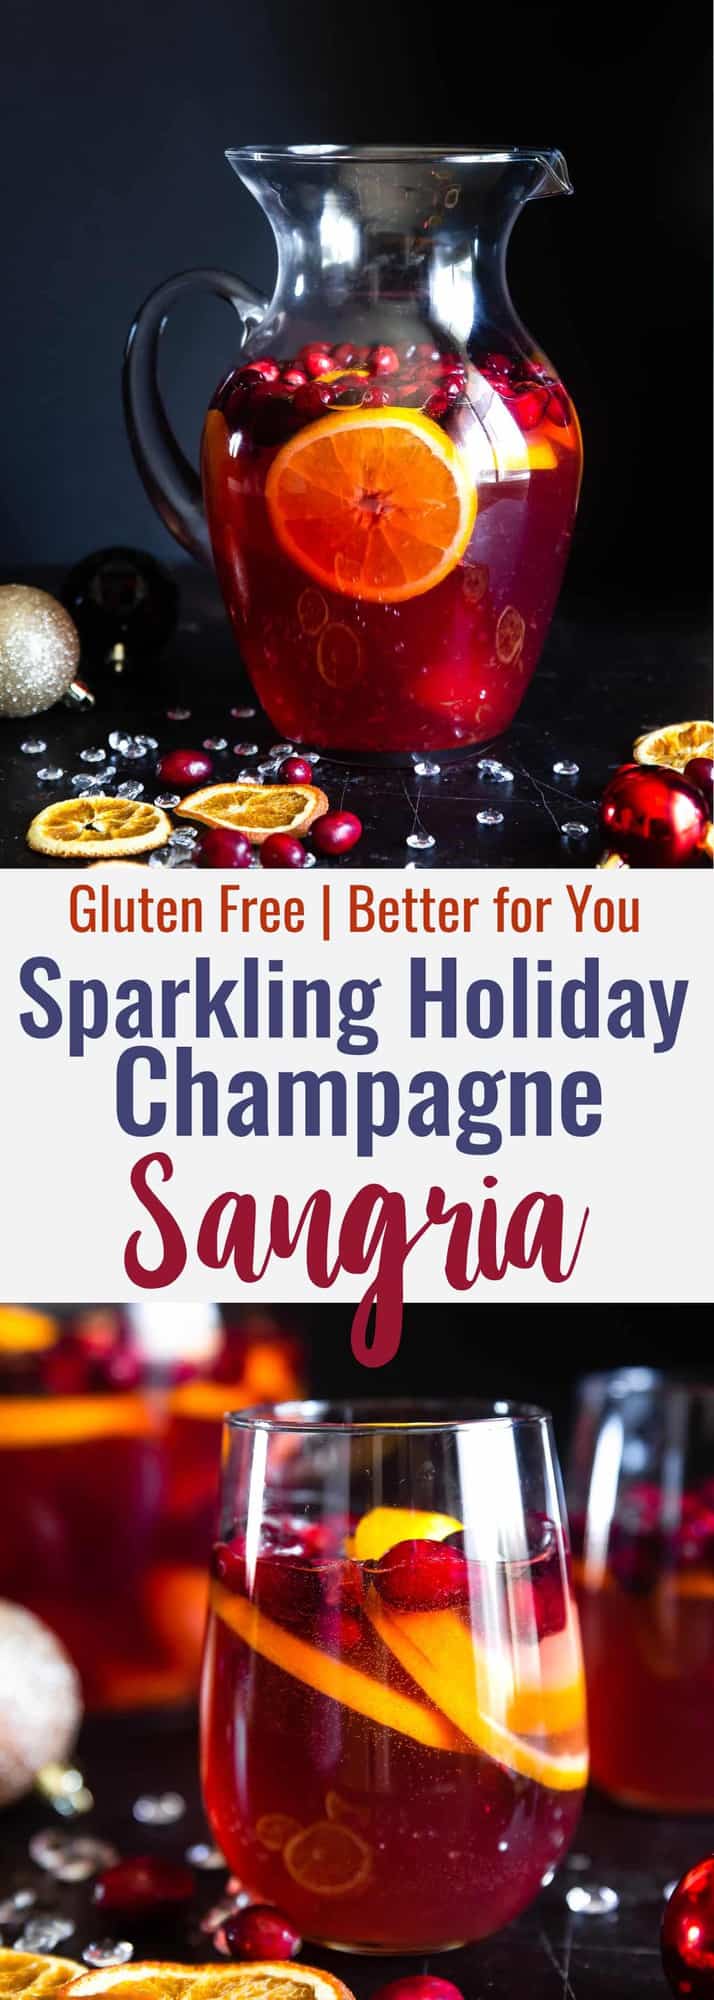 Sparkling Holiday Champagne Sangria - Full of tart cranberries and sweet oranges, this is an easy, better-for-you cocktail that is perfect to serve a crowd this Holiday season! Fizzy, festive and tasty! | #Foodfaithfitness | #Glutenfree #Sangria #Dairyfree #Vegan #Champagne